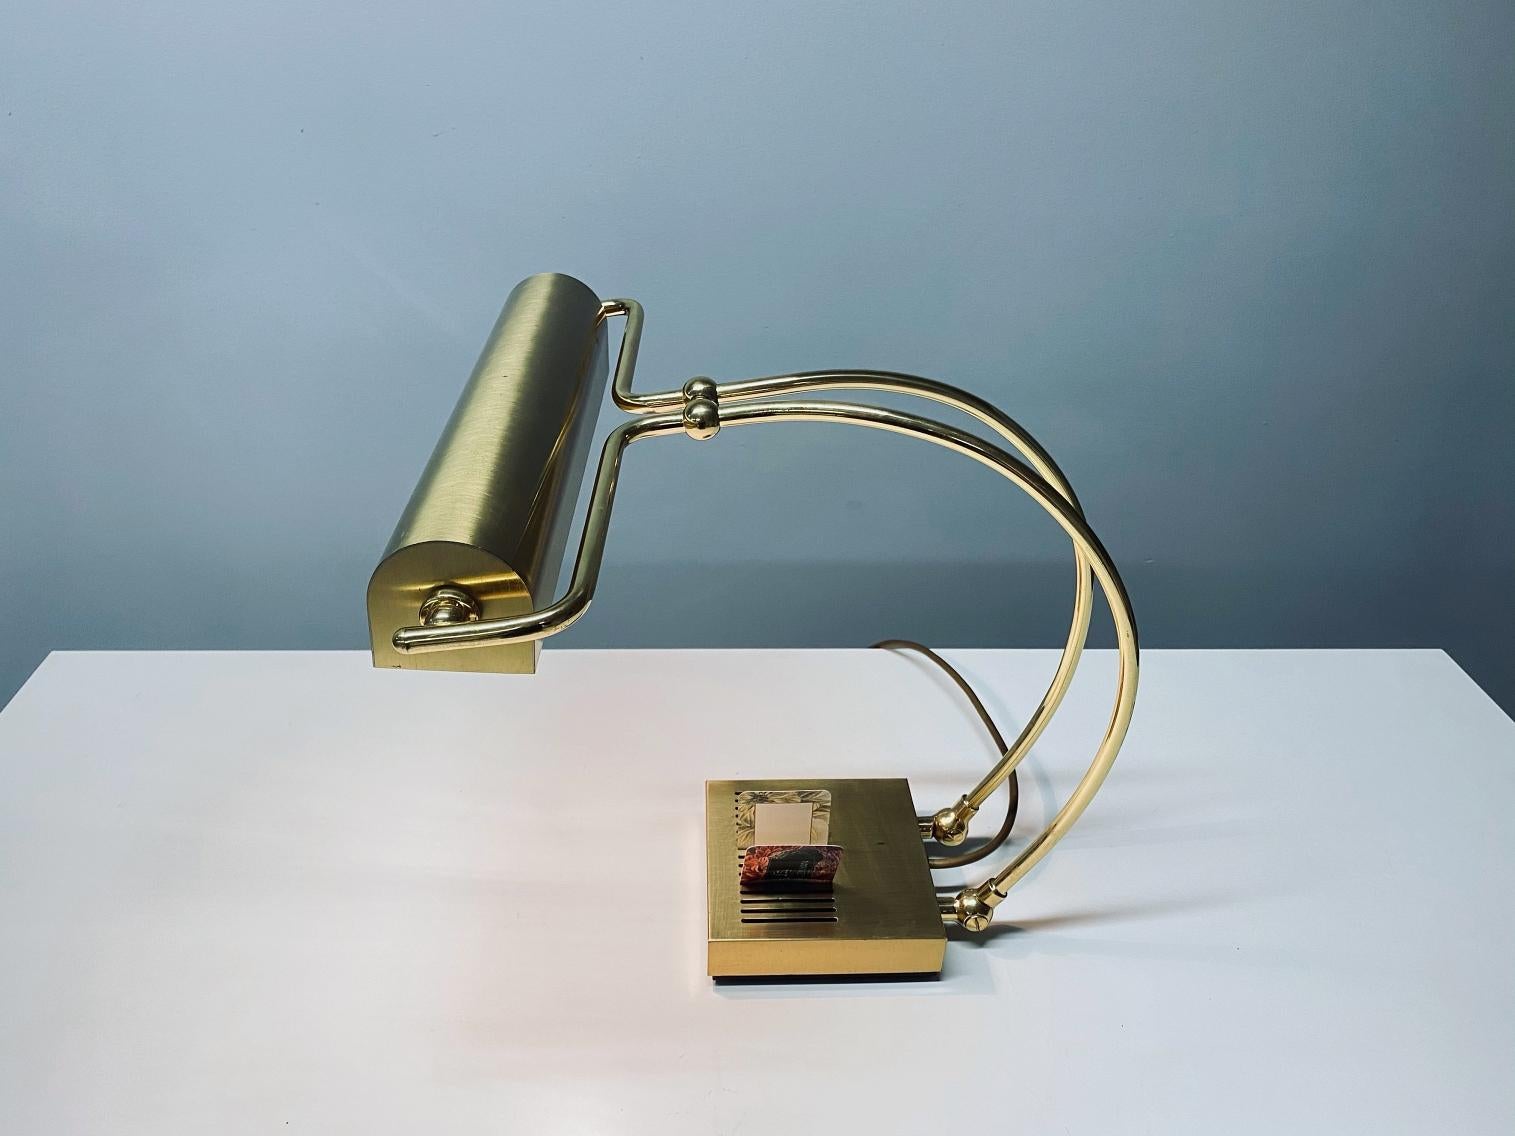 Eileen Gray Style Midcentury Brass Table Lamp, 1970s, Germany For Sale 7